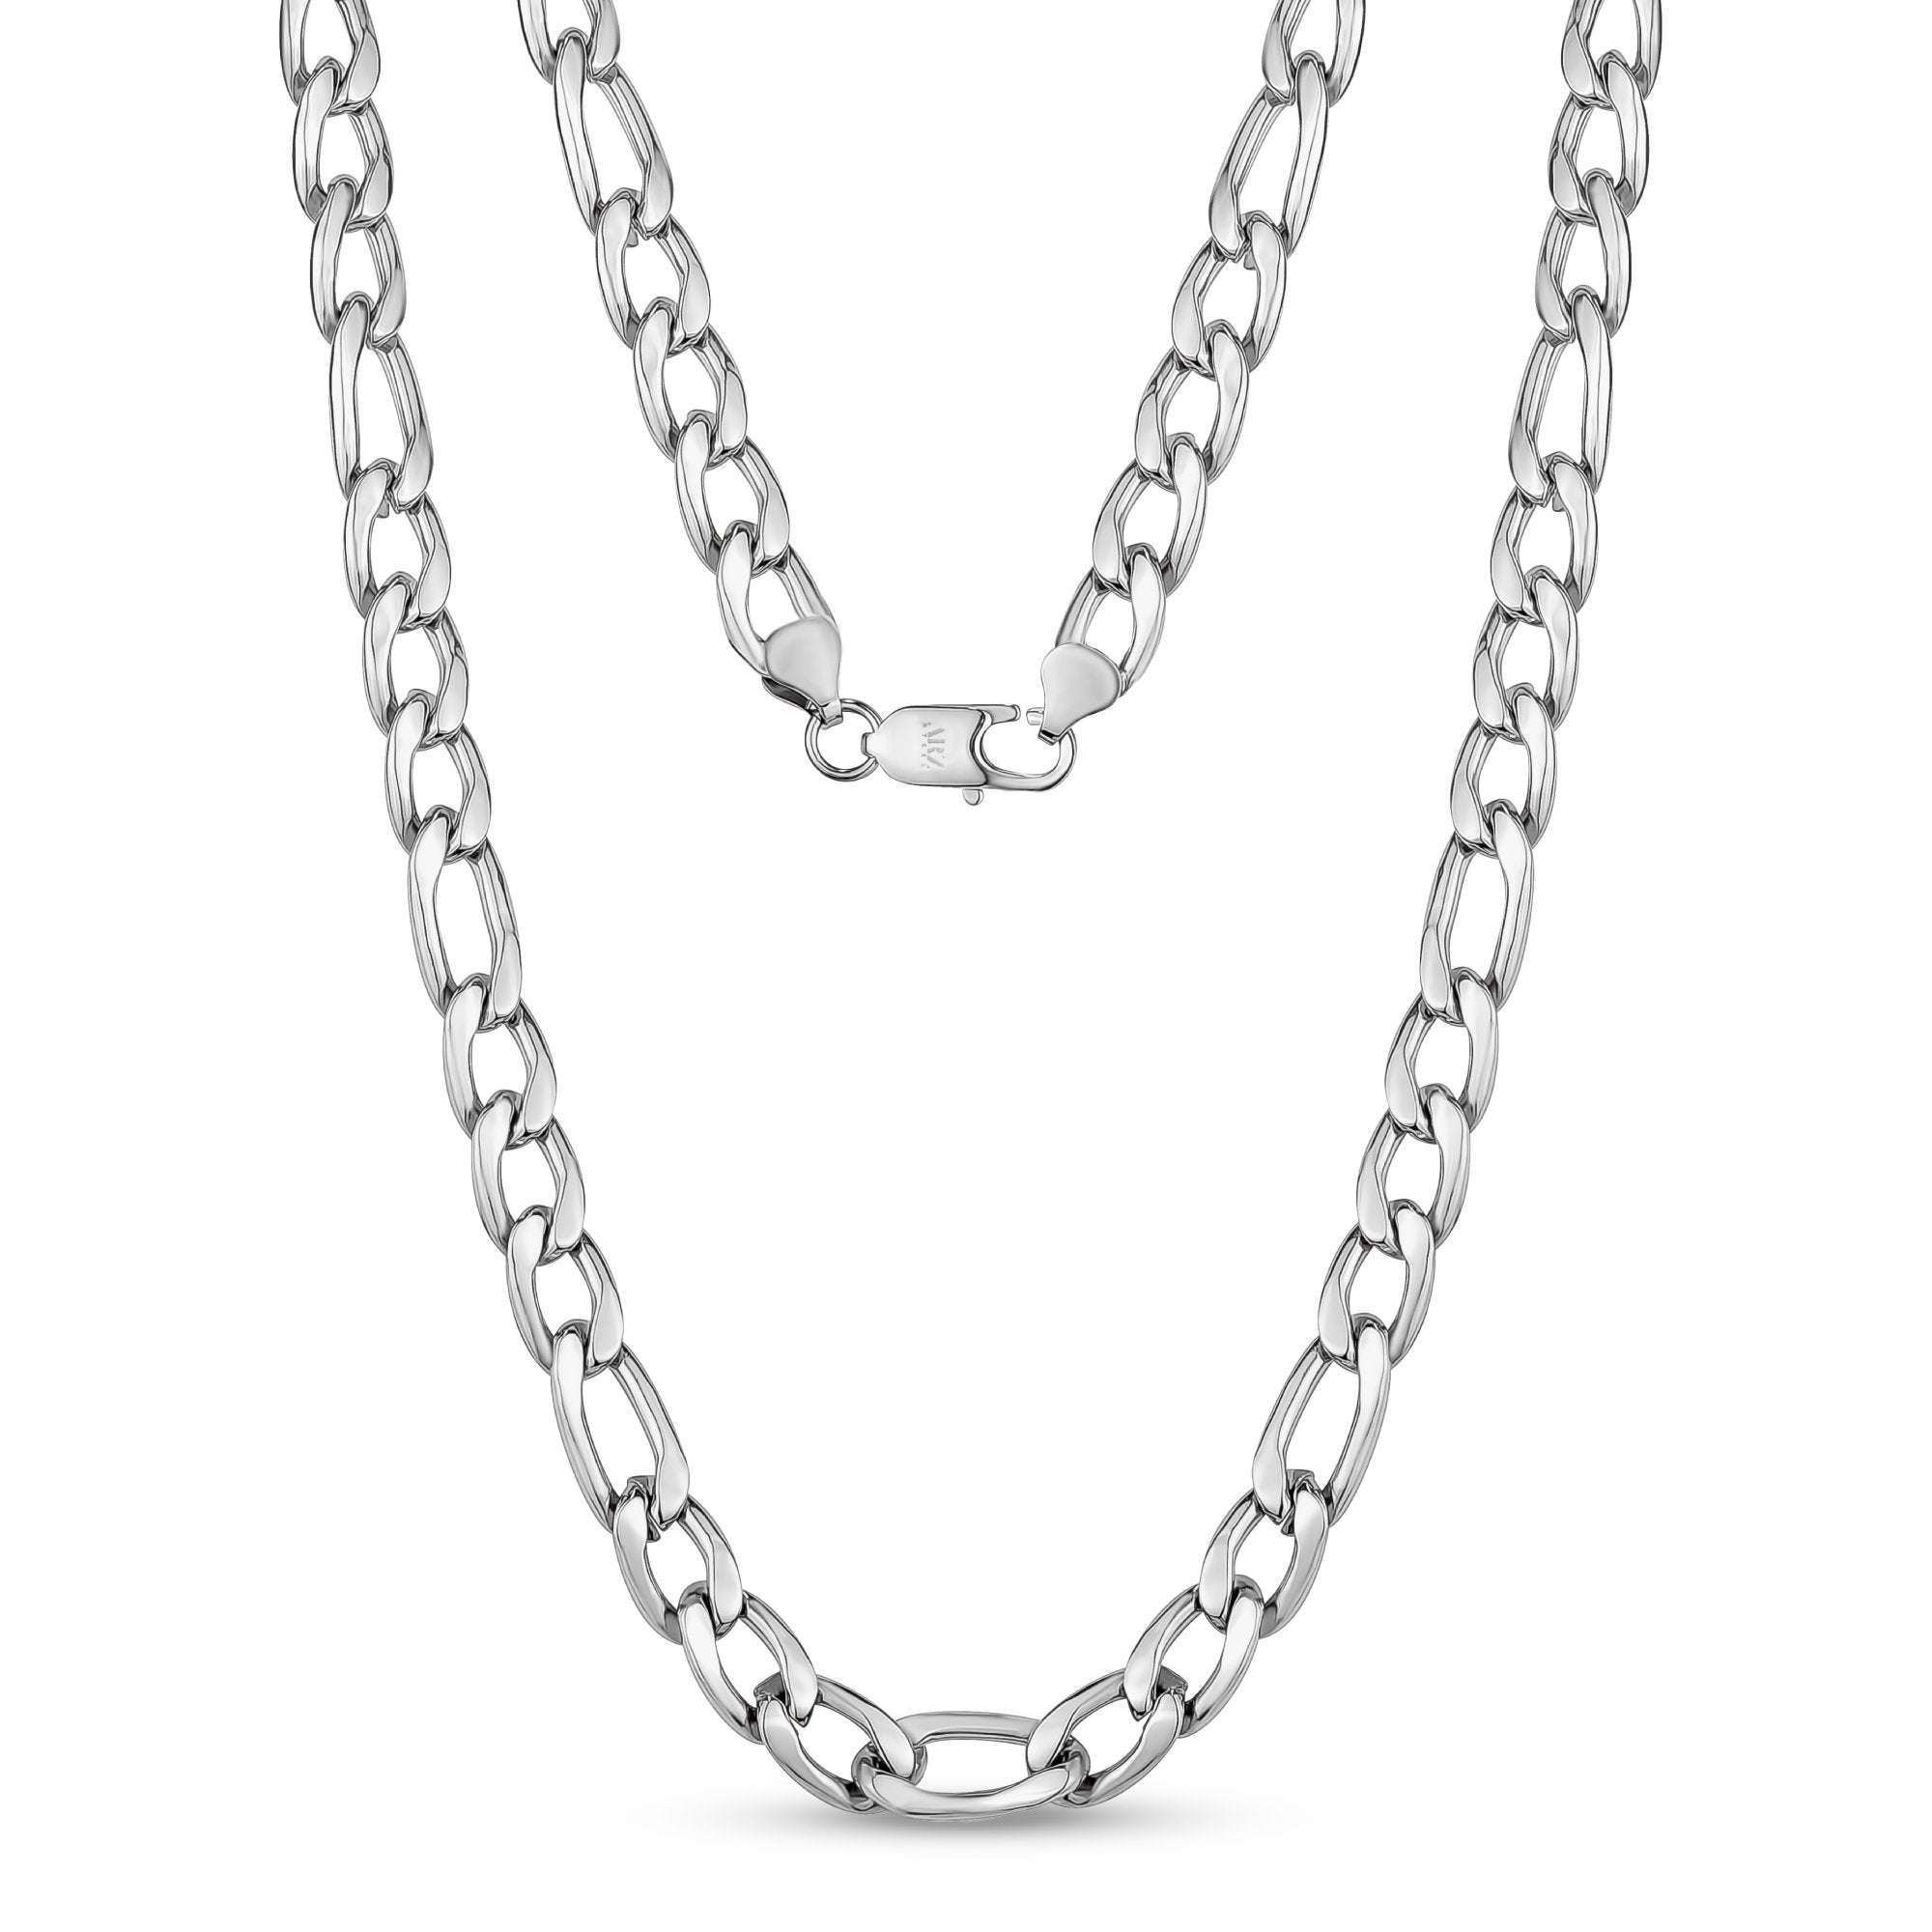 Jagsun Elegent and Stunning 20 Inches Silver Chain for Men and womens  Silver Plated Stainless Steel Chain Price in India - Buy Jagsun Elegent and  Stunning 20 Inches Silver Chain for Men